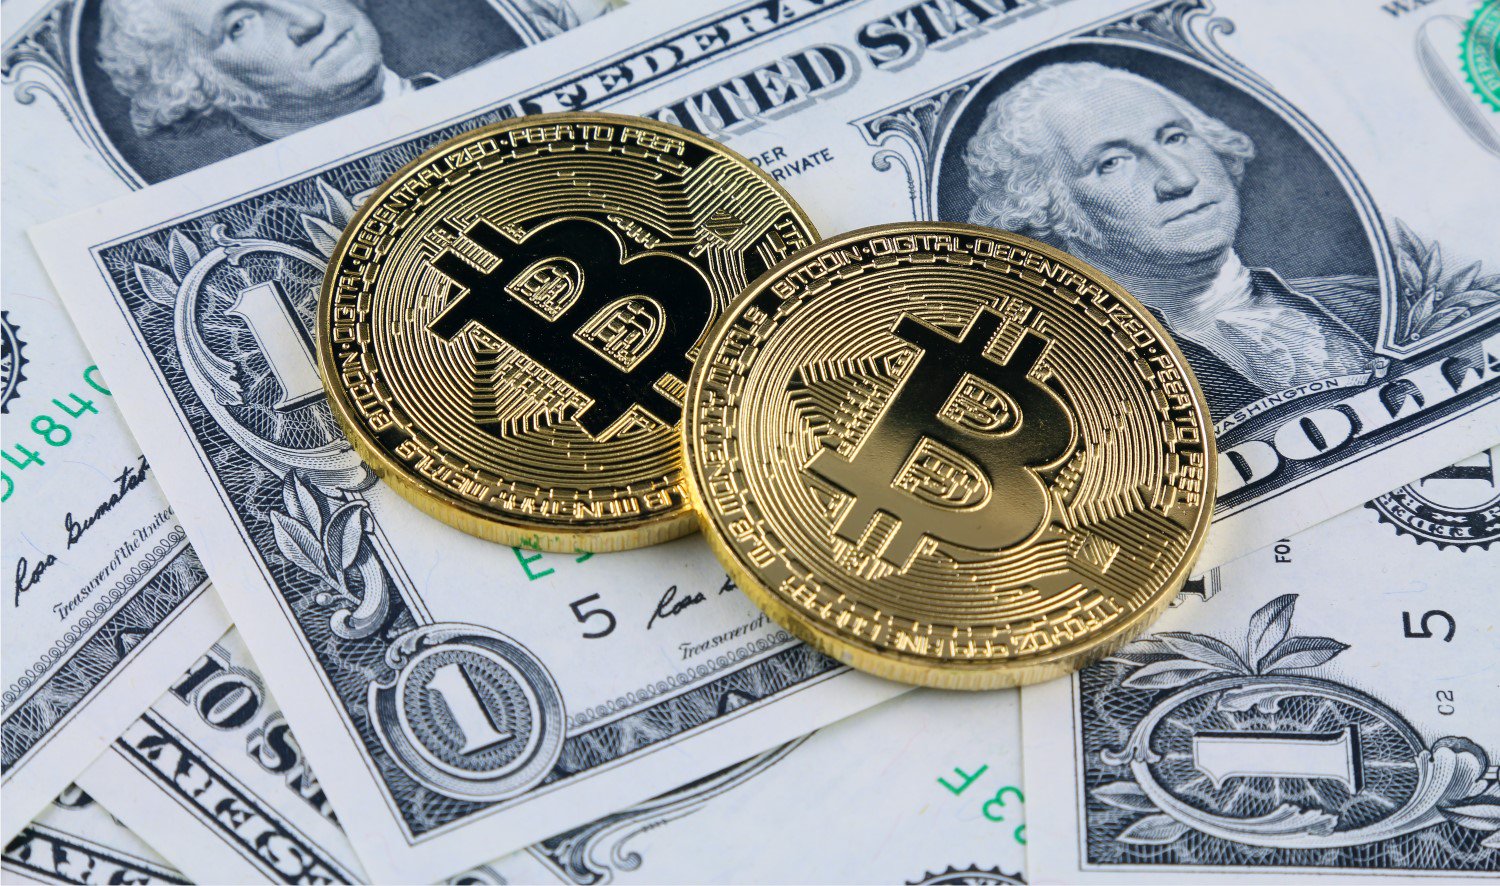 Bitcoin Price Indicator Turns Bullish For First Time In 8 Months